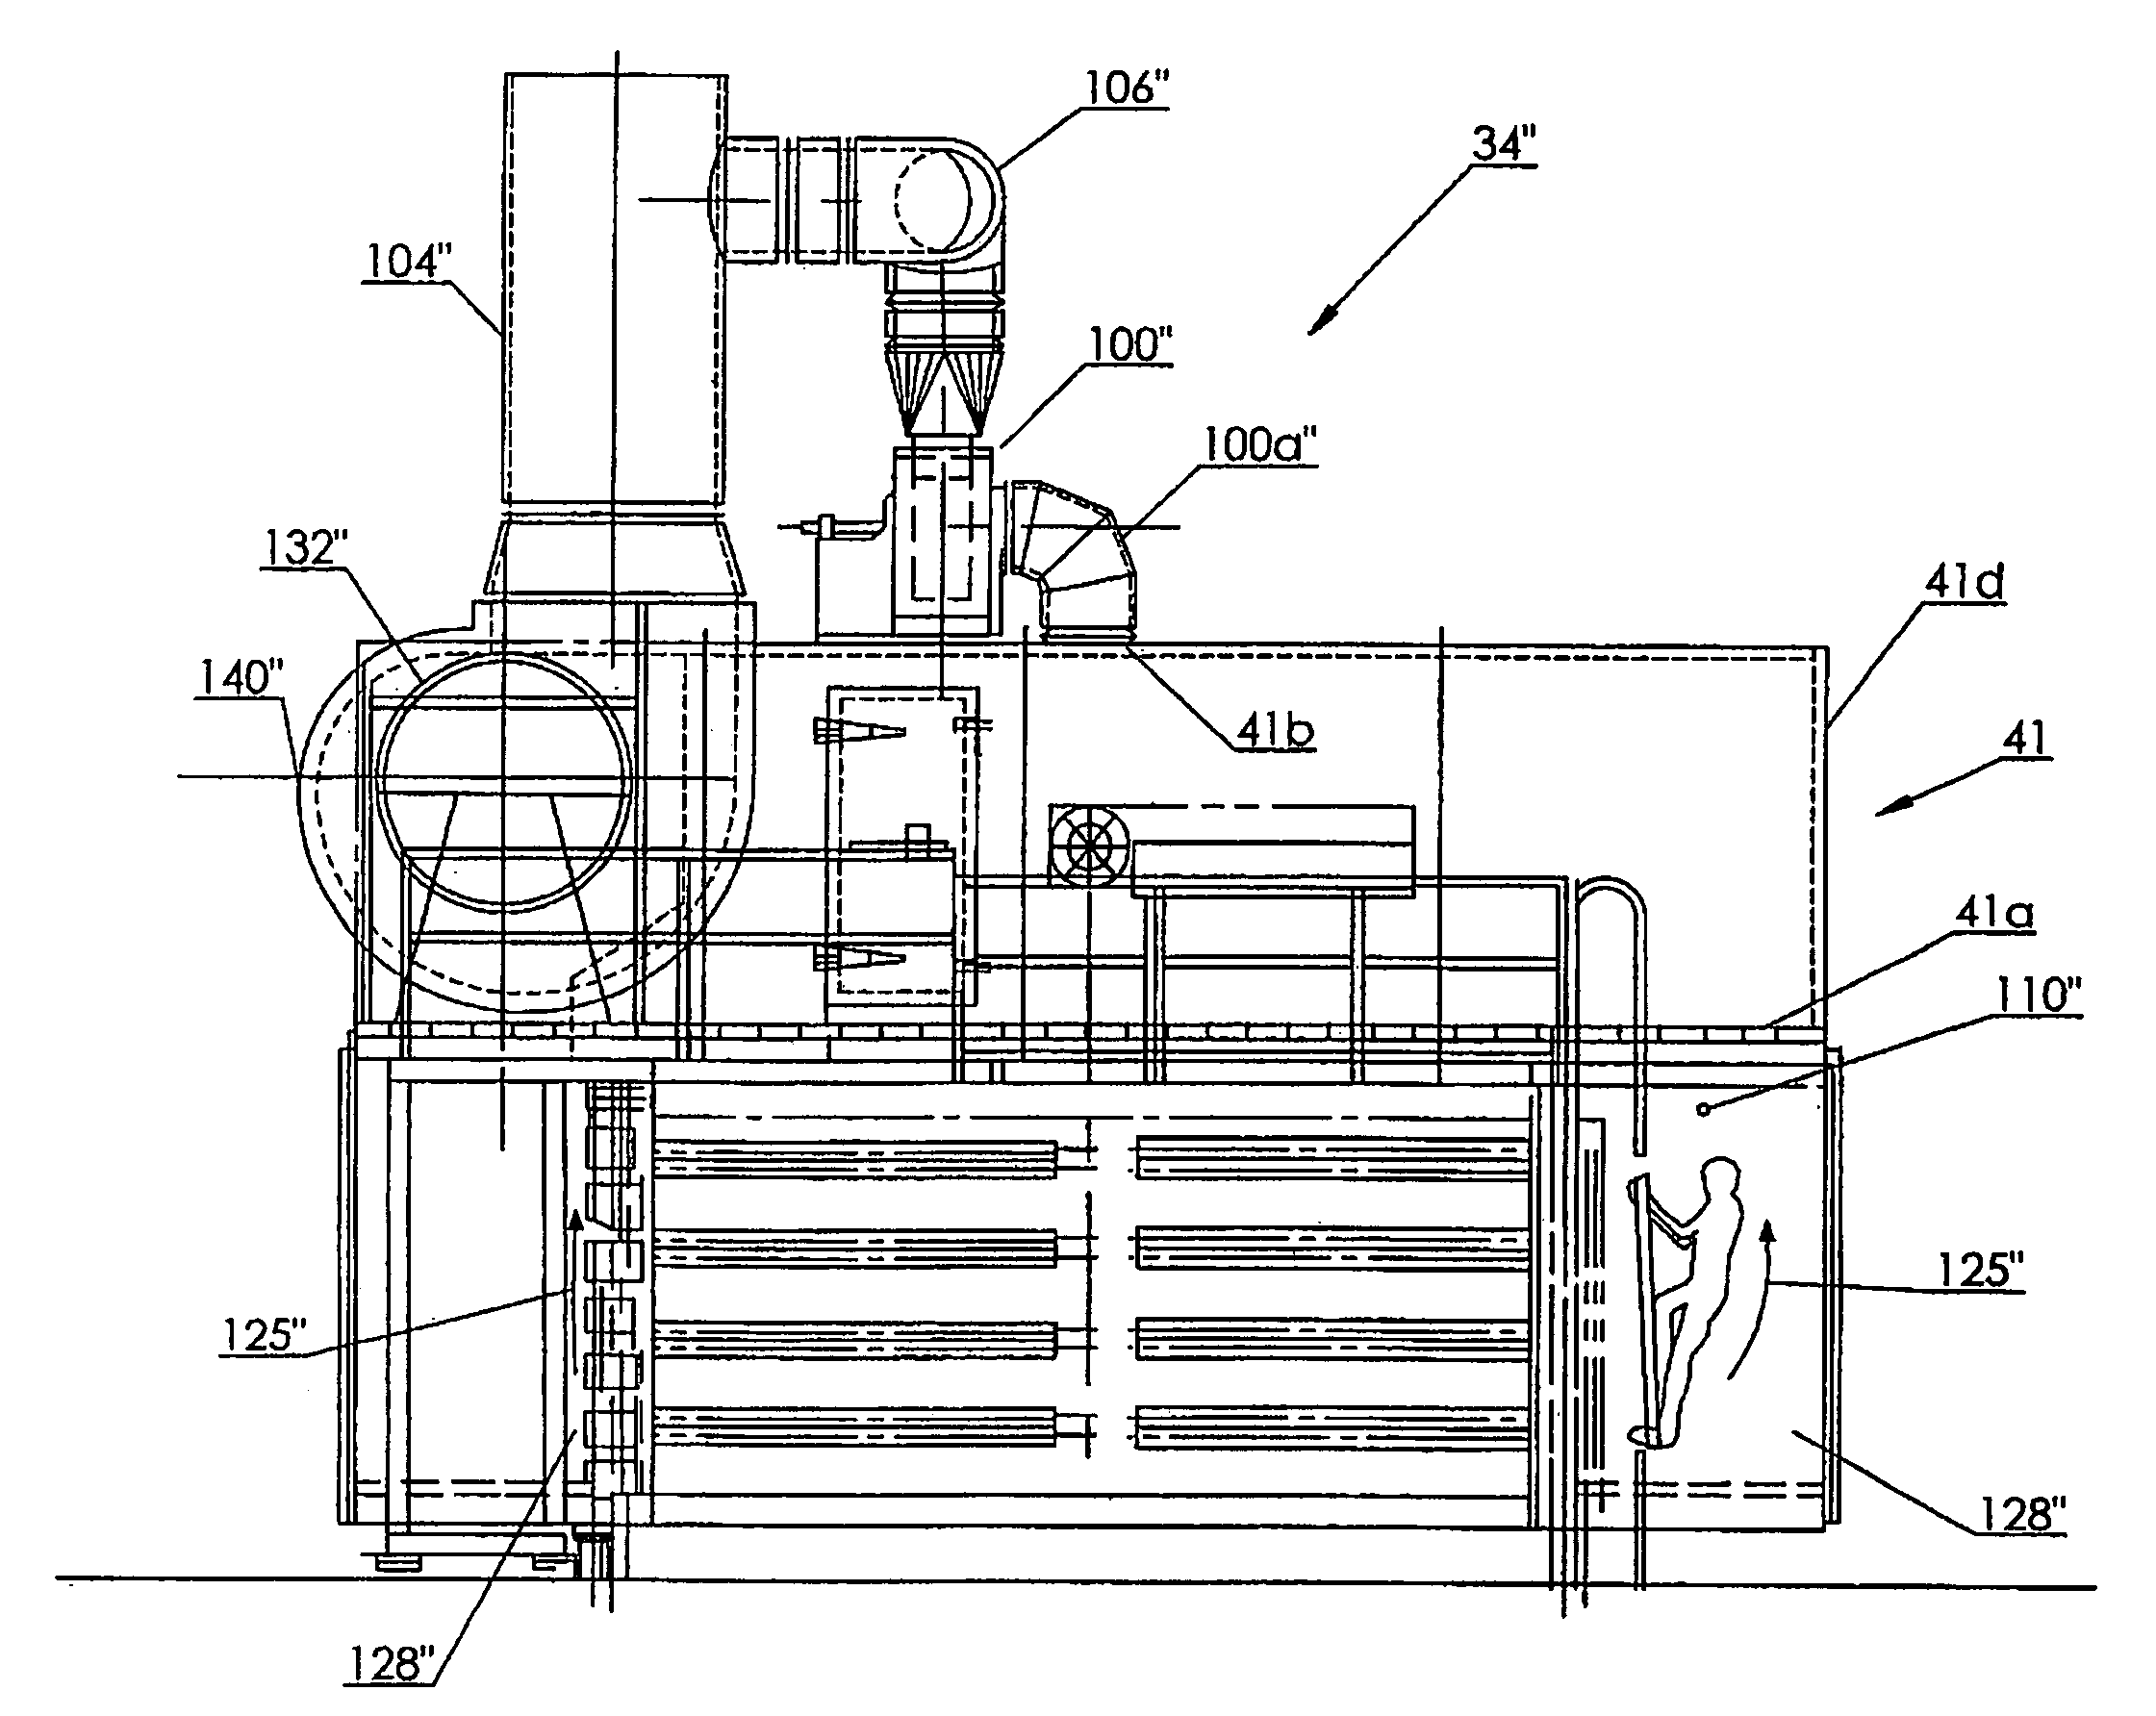 Method and apparatus for inhibiting pitch formation in the wet seal exhaust duct of a veneer dryer